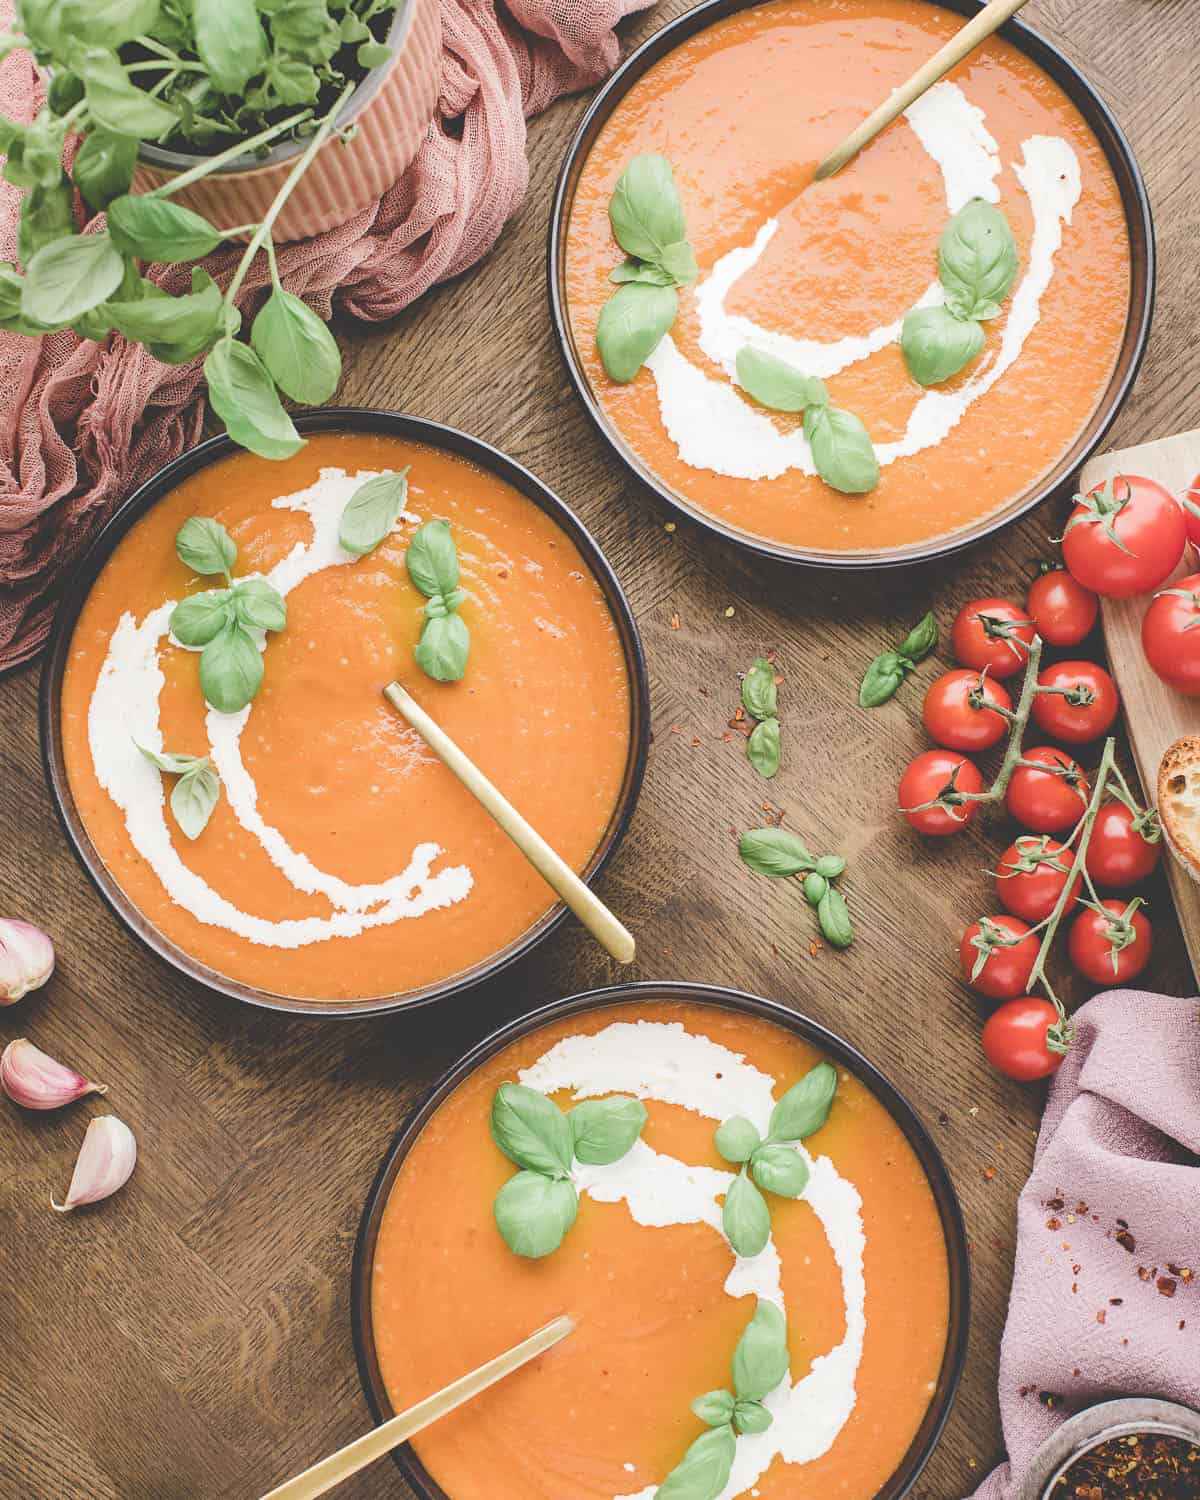 3 bowls of tomato soup with swirls of heavy cream topped with fresh basil leaves, surrounded by fresh tomatoes and basil, on a wood surface. Top view.